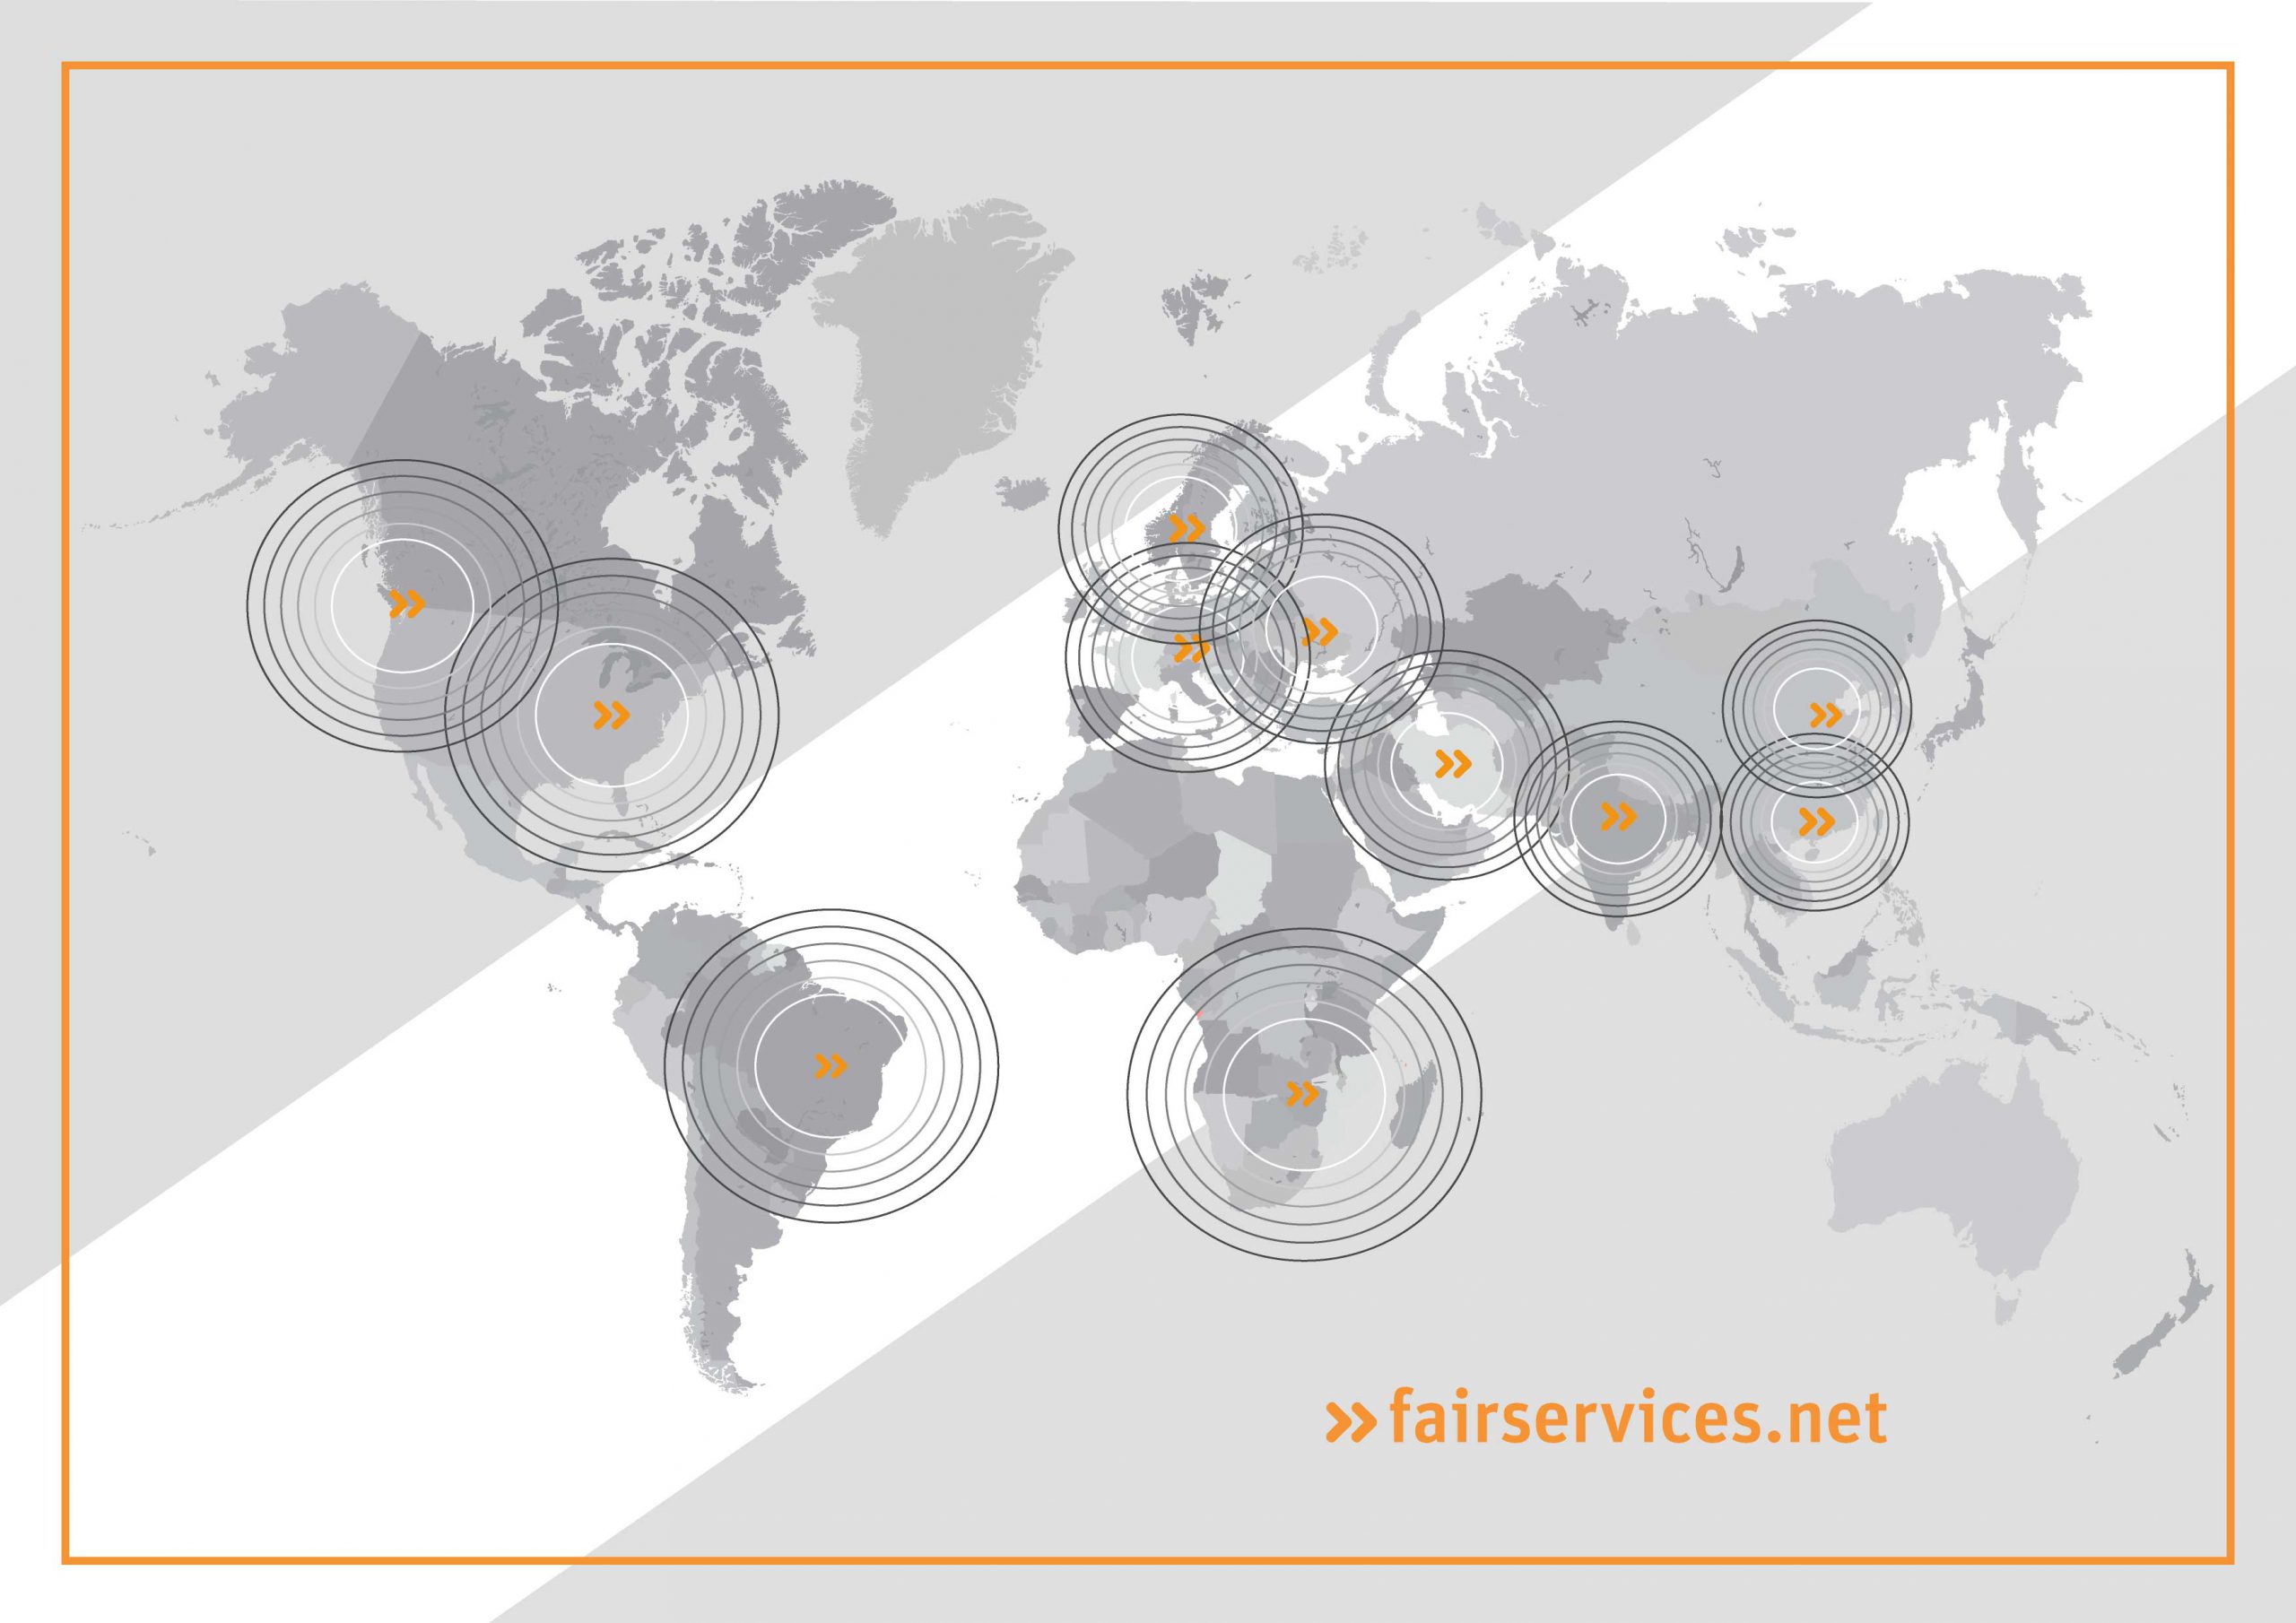 Map showing that fairservices is active all over the world